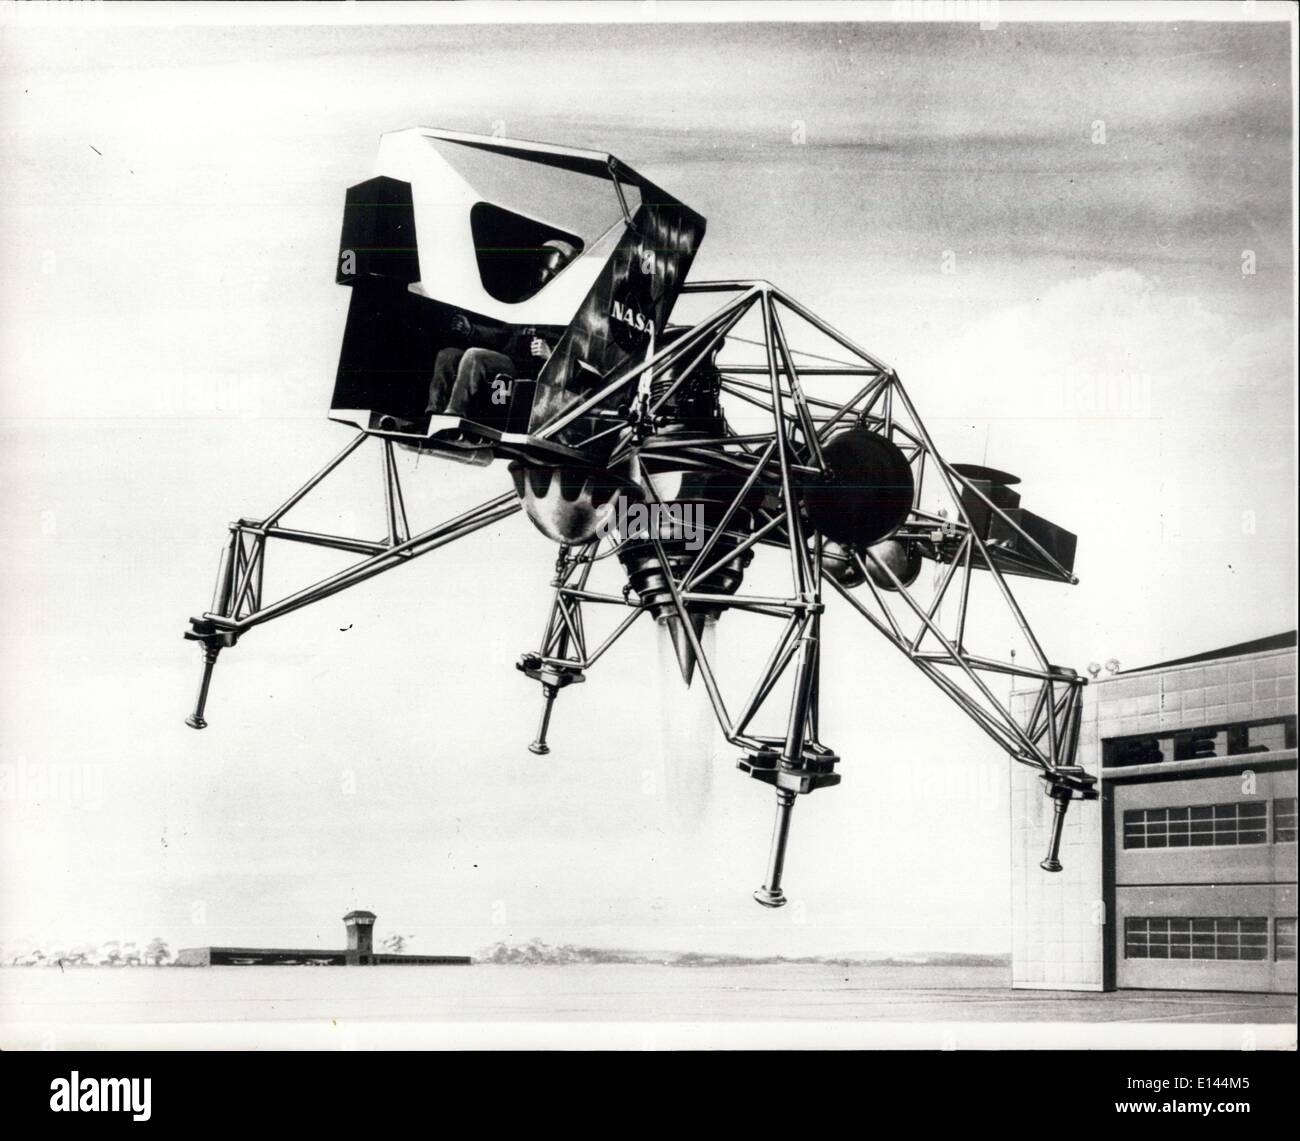 Apr. 04, 2012 - 11.4.67 Artist's concept of lunar landing training vehicle. This is an artist's concept of the Lunar Landing Training Vehicle (LLTV) to be built under contract by Bell Aerosystems Co., Buffalo, N.Y. for the National Aeronautics and Space Administration to provide three vehicles which the astronauts will use to practice simulated landings on the moon. The vehicles will be capable of simulating the one-sixth gravity environment of the moon. When in use the LLTV is flown off the ground on its jet engine, then maneuvered like a moon craft with small rockets Stock Photo